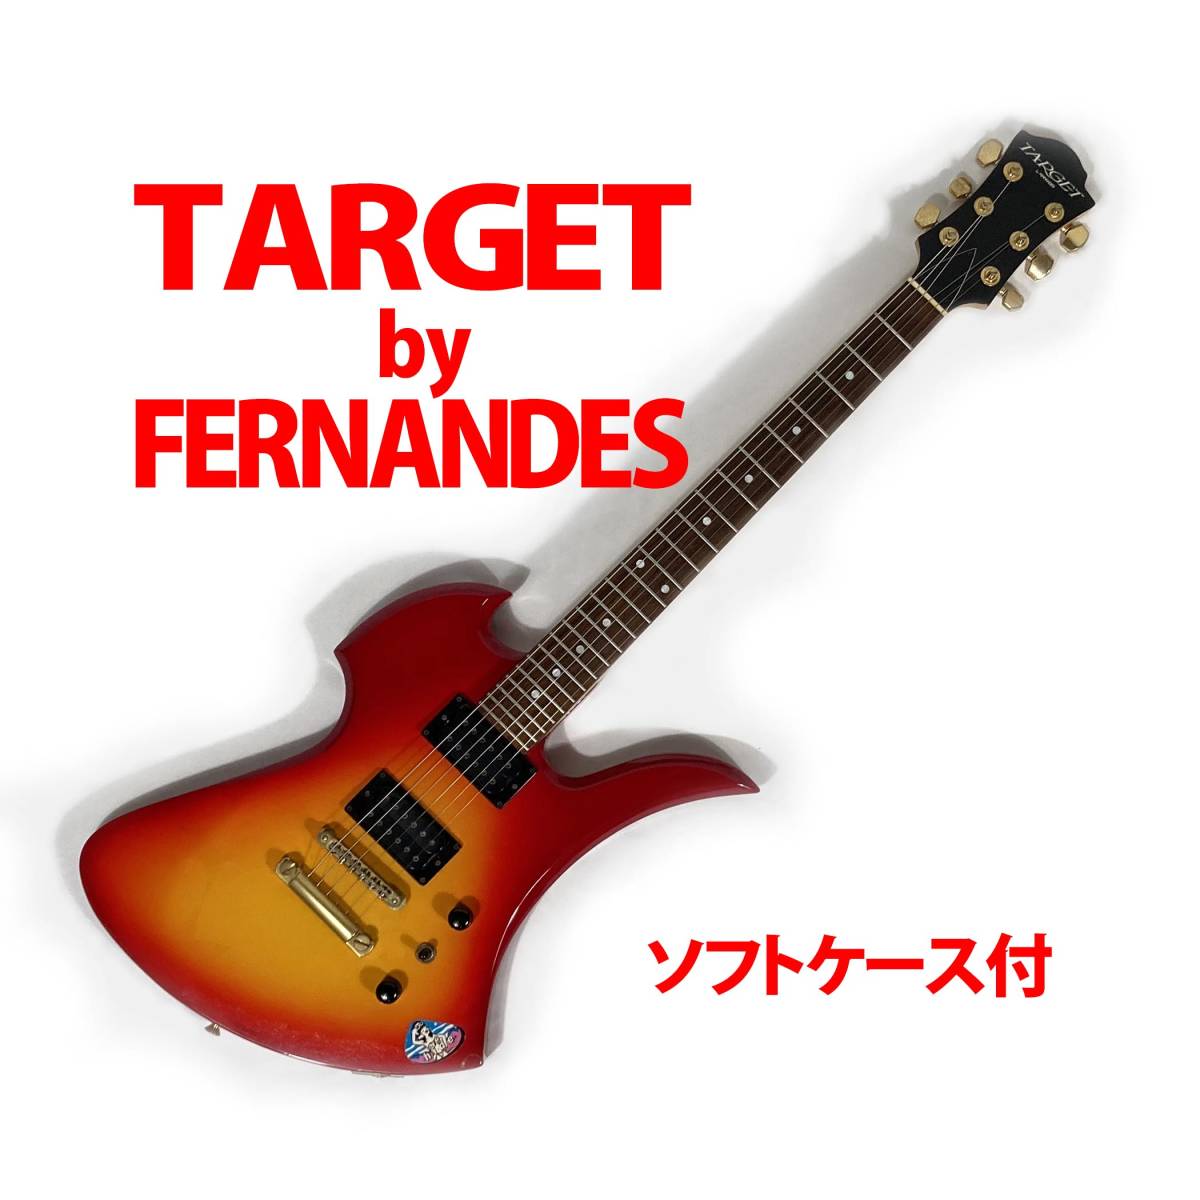 TARGET by FERNANDES モッキンバードタイプ中古エレキギター ソフト